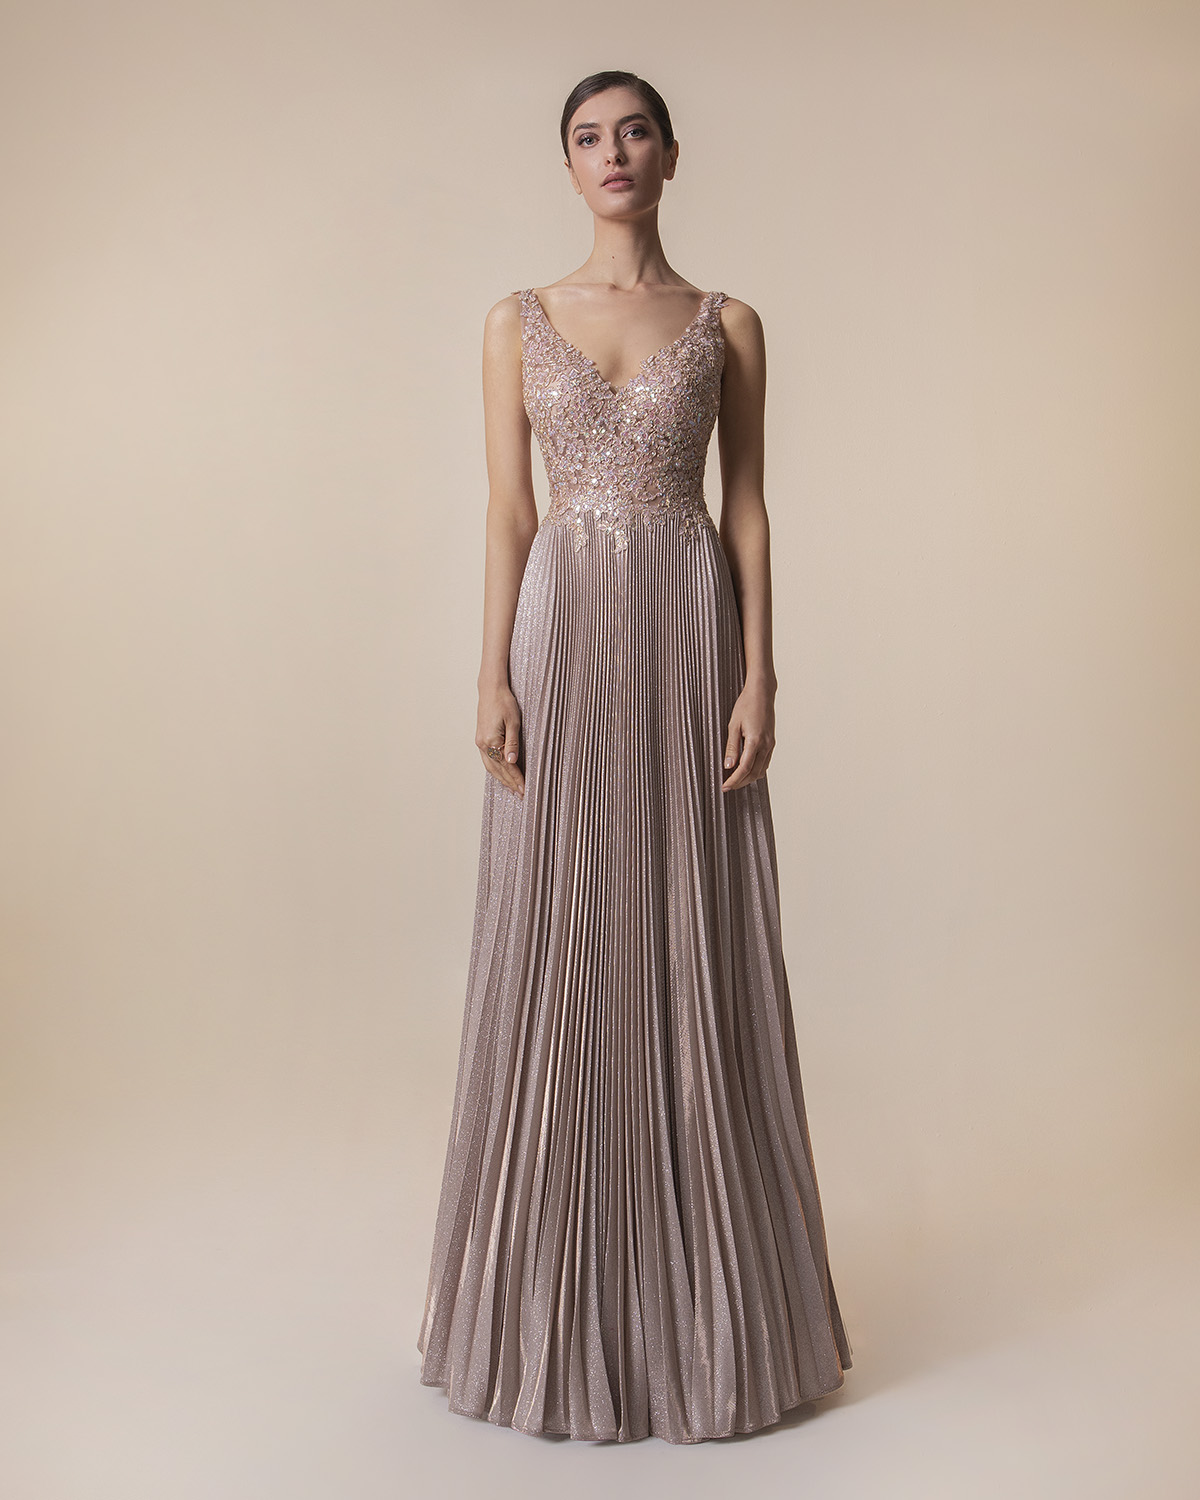 Evening Dresses / Long pleated dress with shining fabric, applique beaded lace on the top